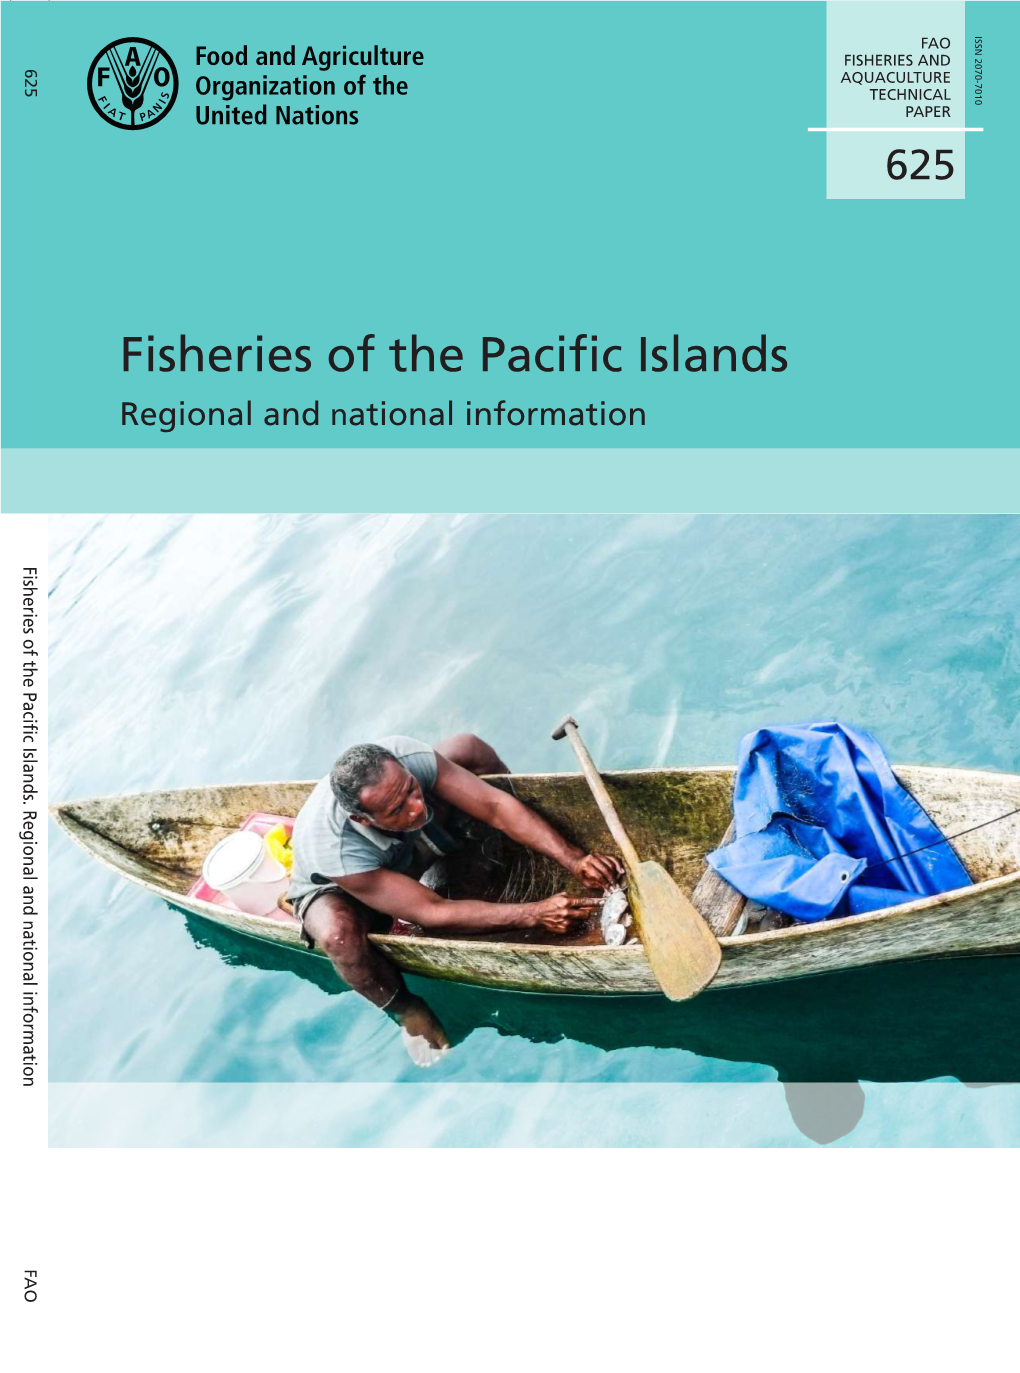 Fisheries of the Pacific Islands – Regional and National Information